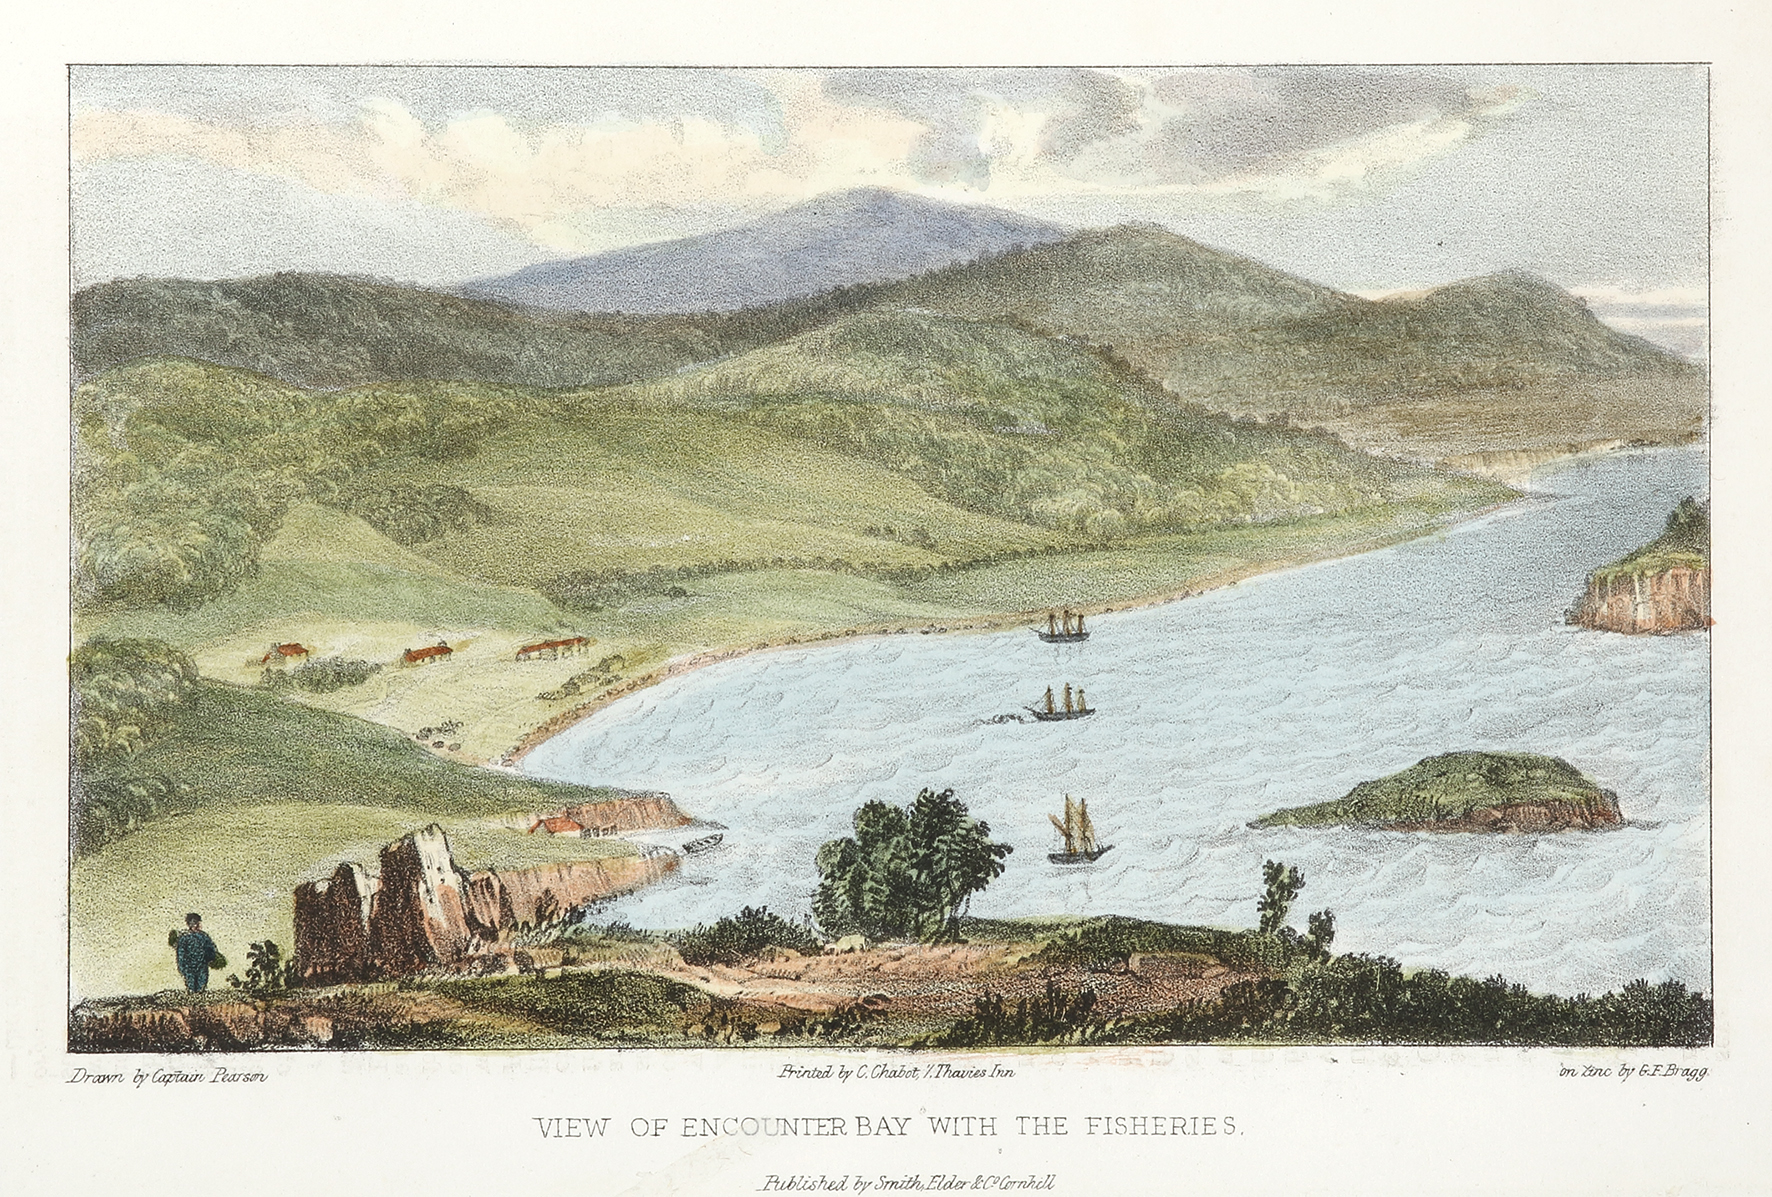 View of Encounter Bay with the Fisheries. - Antique View from 1839